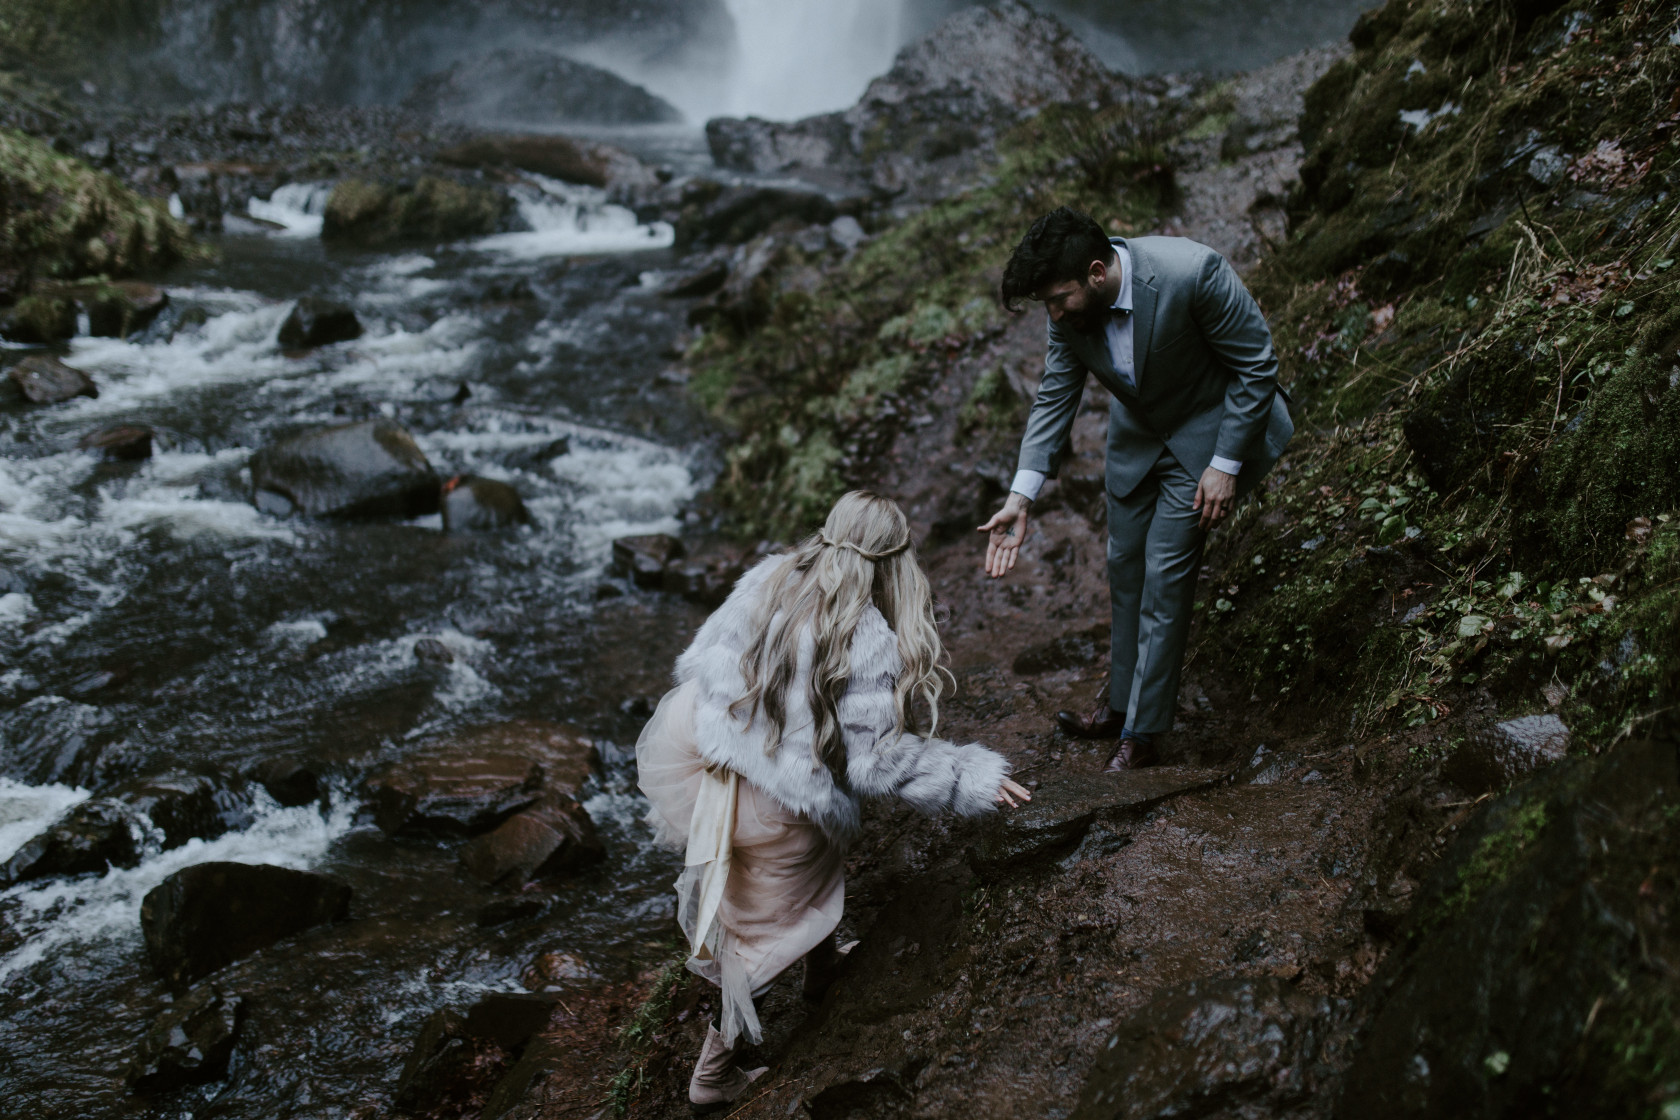 Boris holds out a hand for Tyanna as they venture toward the base of Latourell Falls. Adventure elopement in the Columbia River Gorge by Sienna Plus Josh.